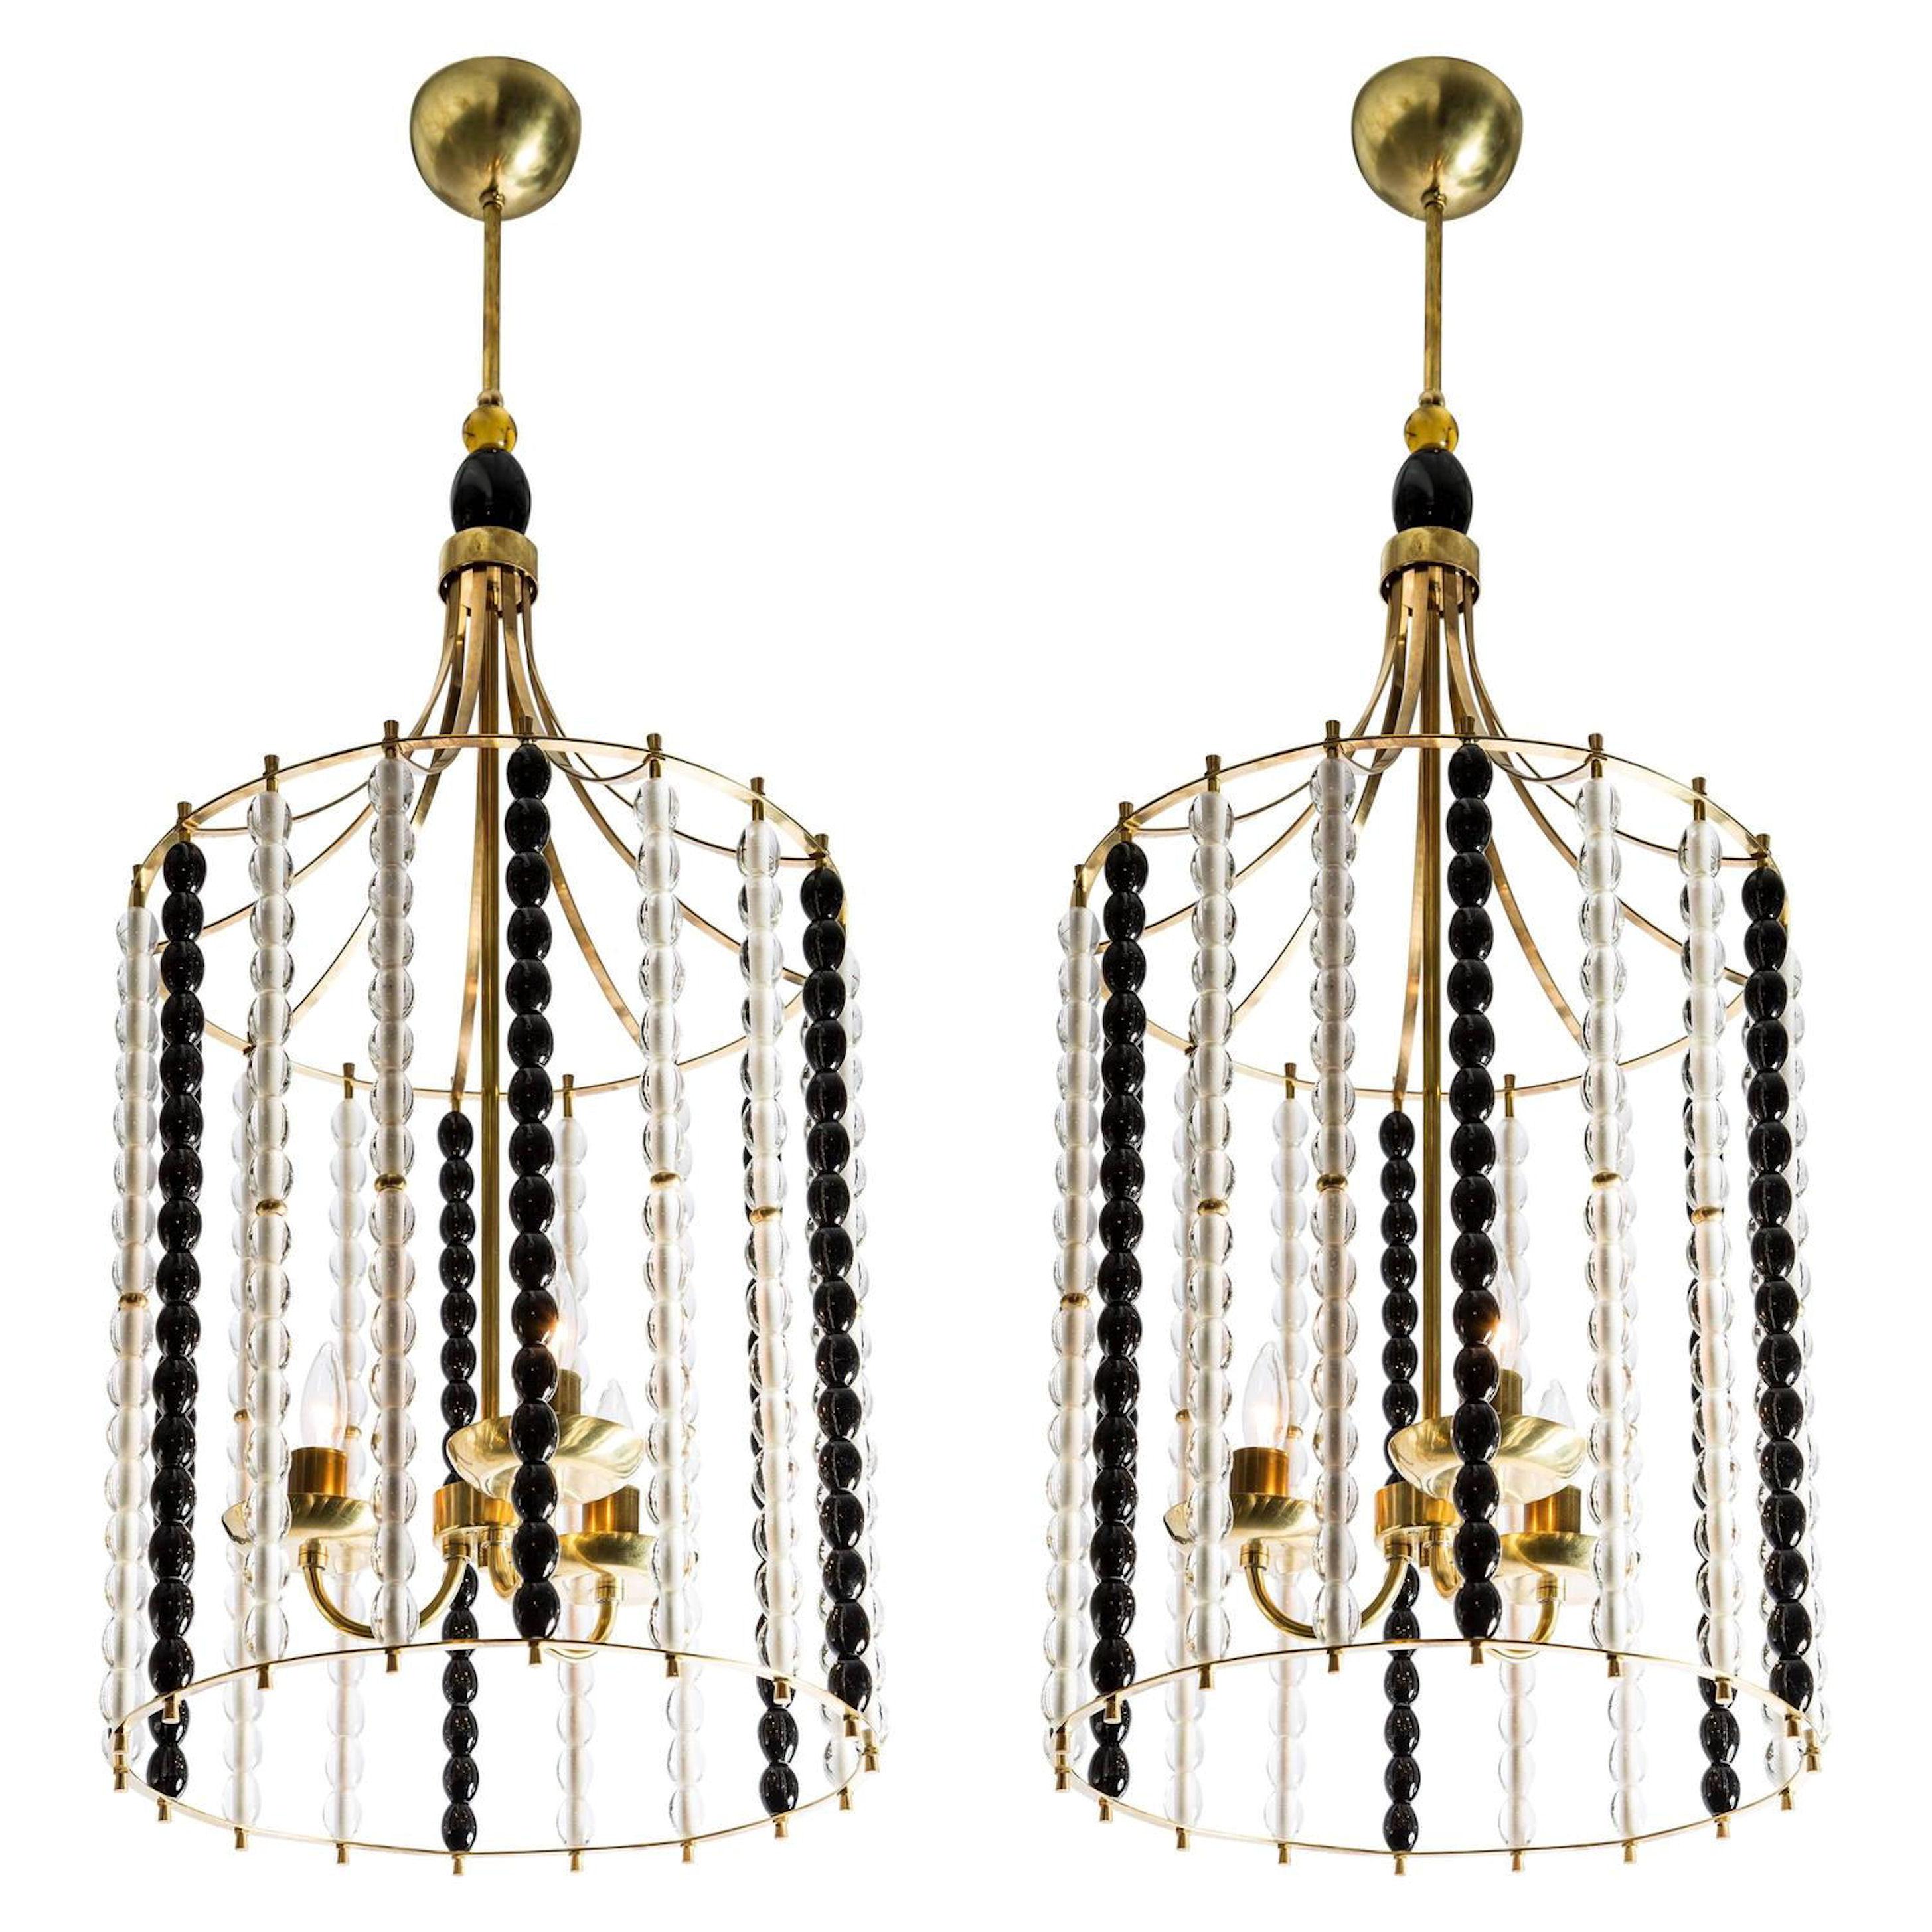 Large Mid-Century Modern Brass Chandeliers with Murano Glass Barbini Style, Pair